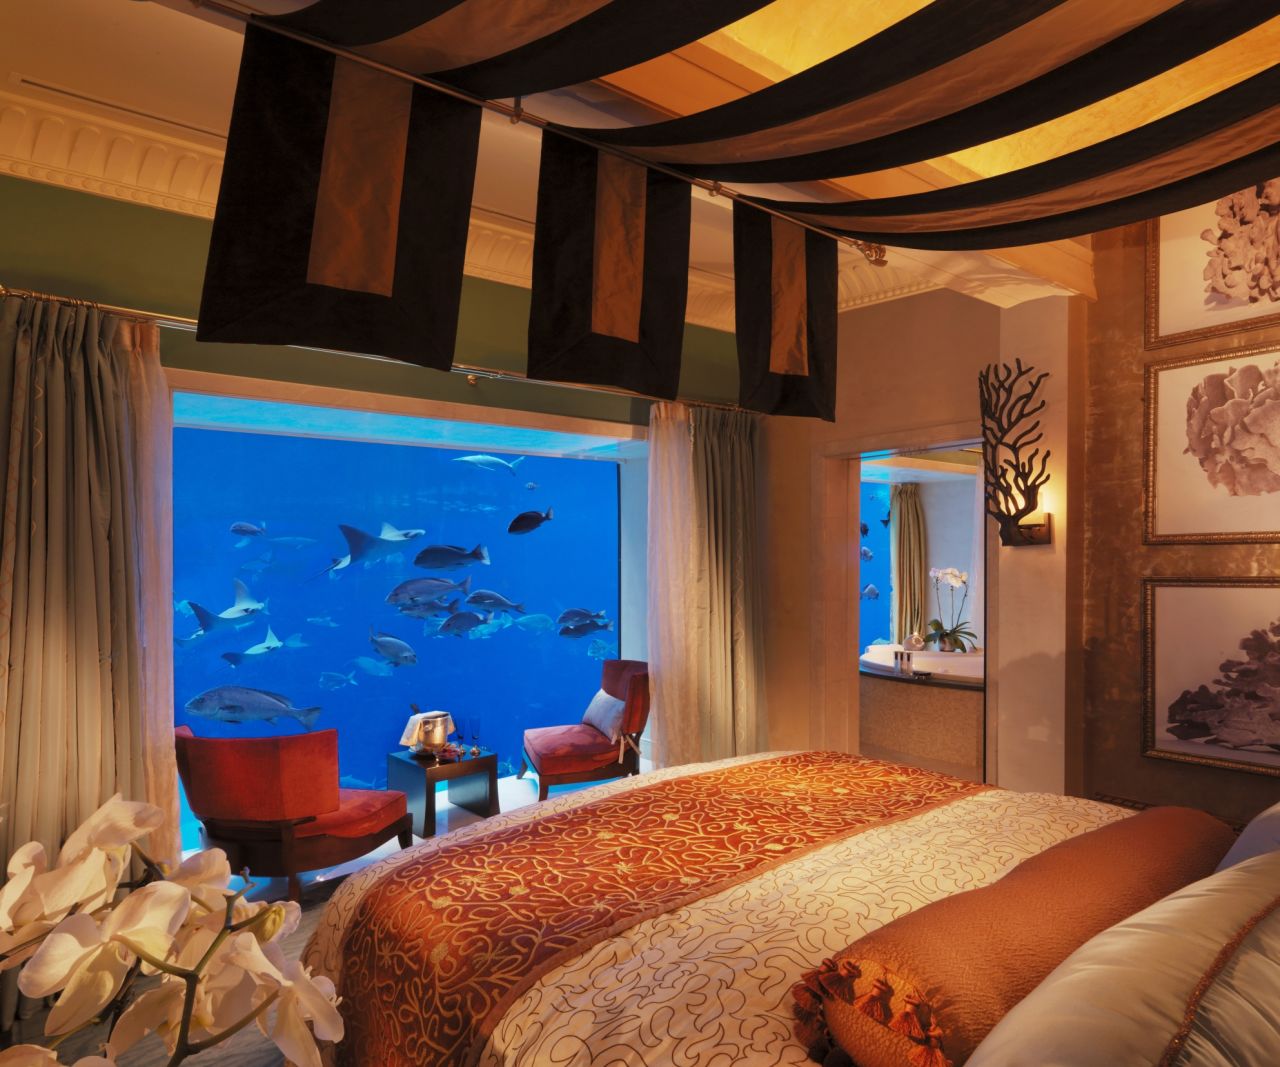 For approximately $12,250 a night, guests can look out of any of the three-floor suite's windows and see sharks and stingrays among 65,000 sea creatures occupying a humongous aquarium.